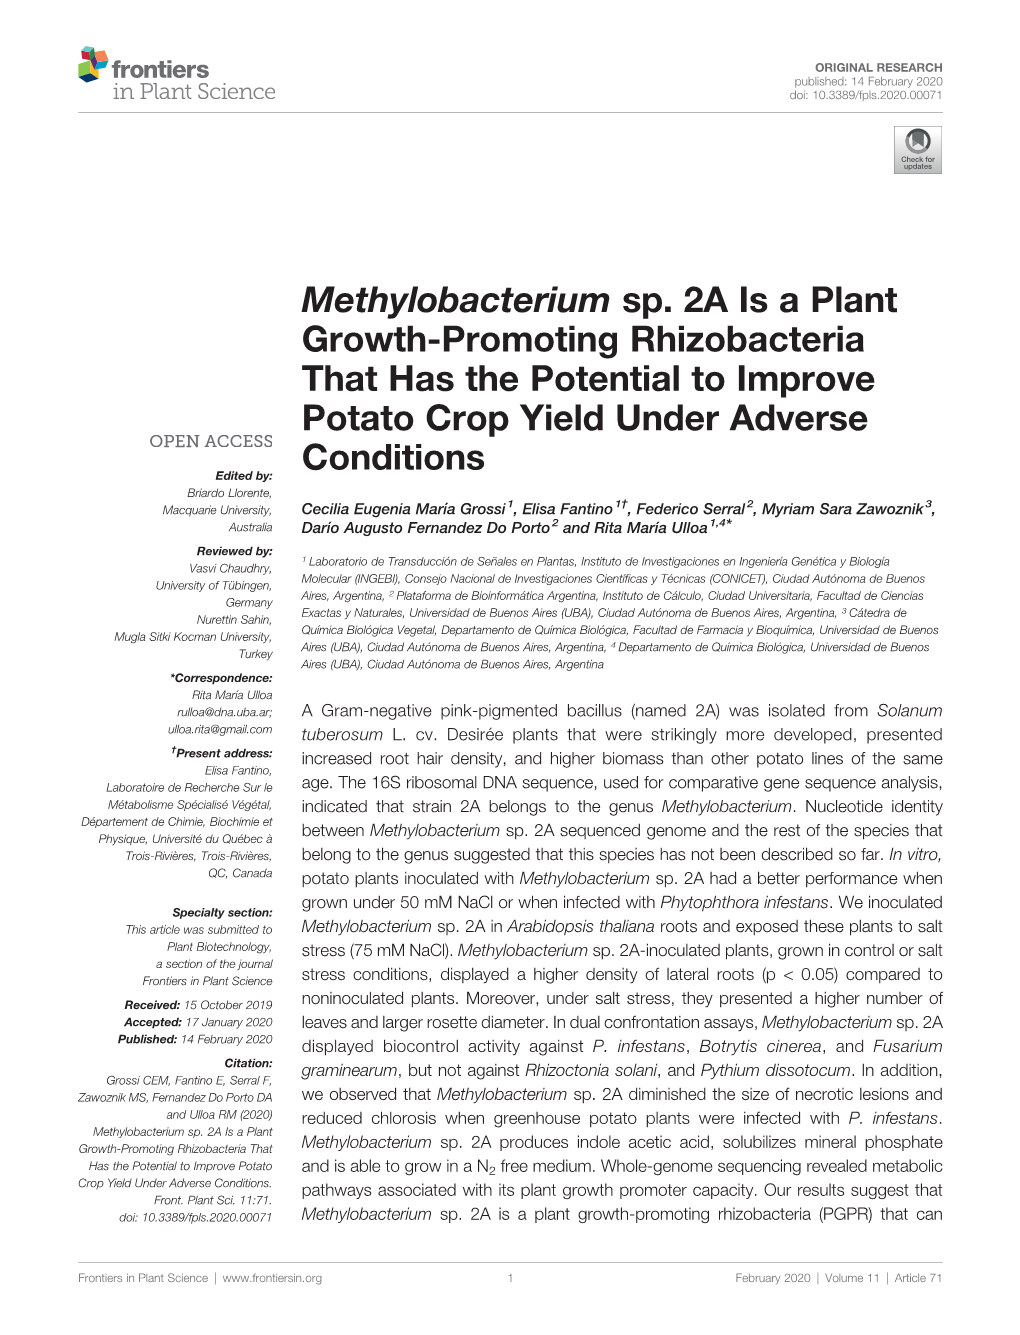 Methylobacterium Sp. 2A Is a Plant Growth-Promoting Rhizobacteria That Has the Potential to Improve Potato Crop Yield Under Adverse